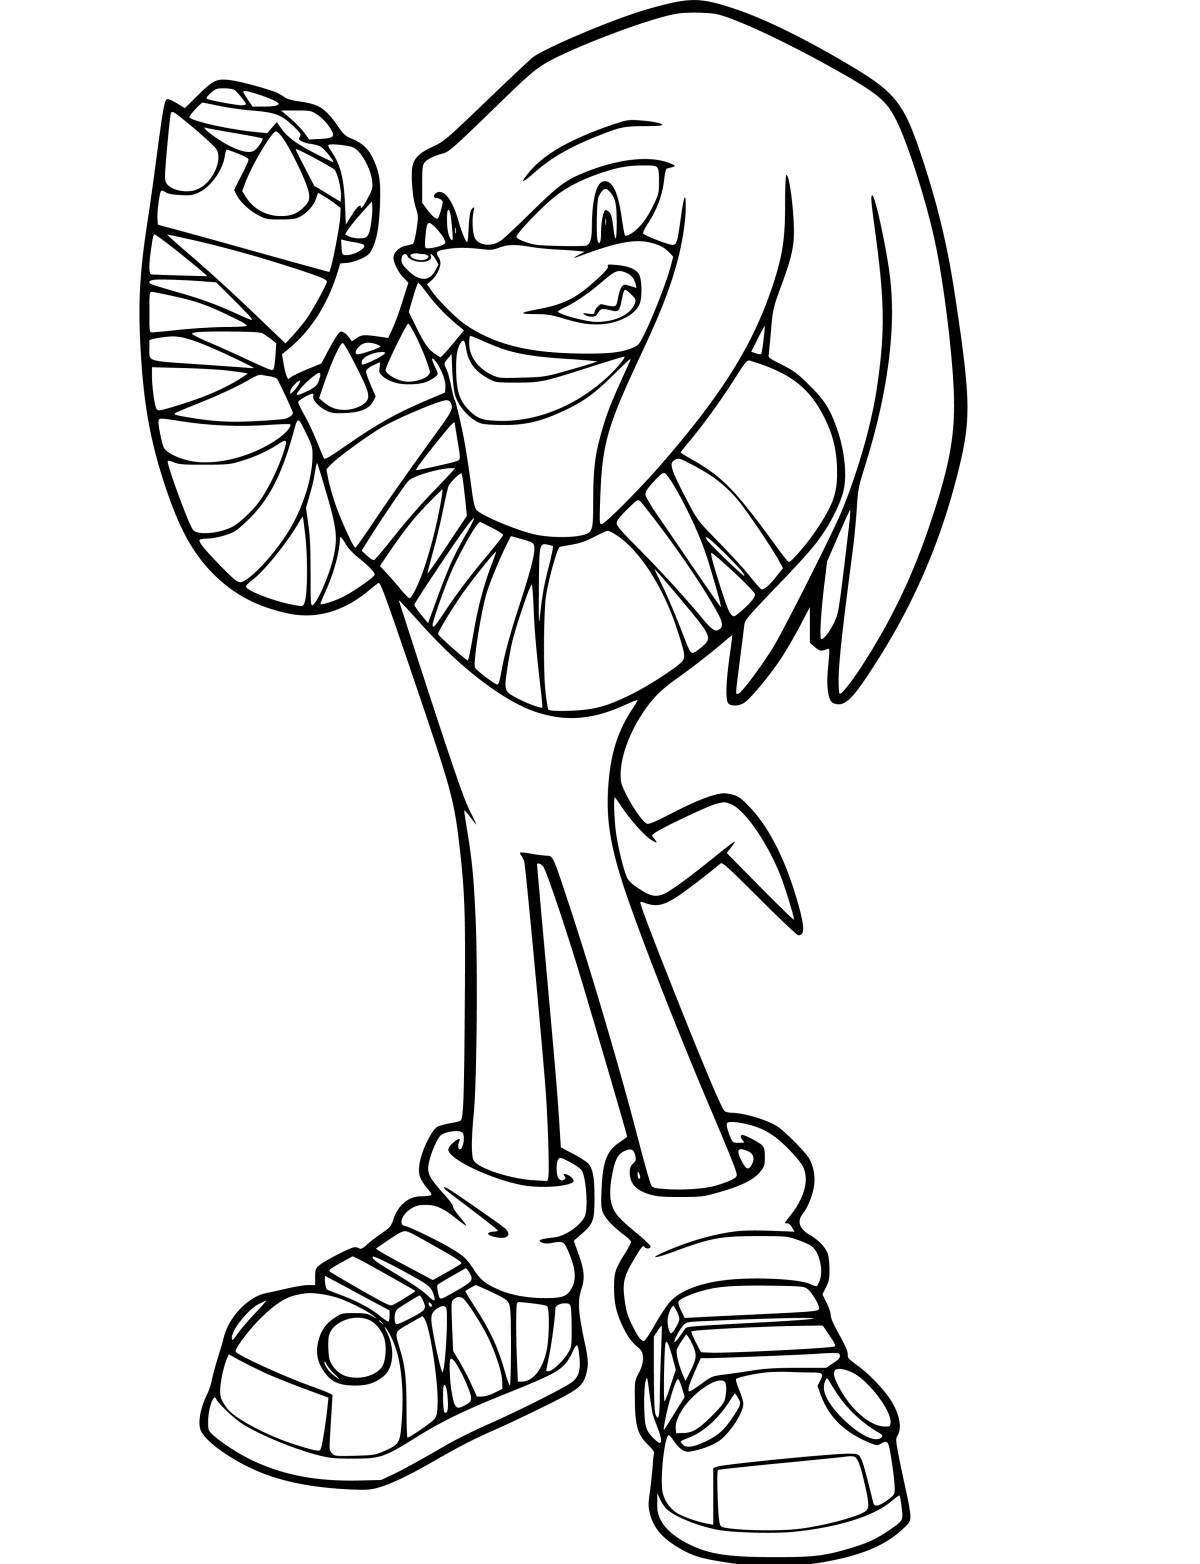 Adorable Knuckles the Echidna Coloring Page